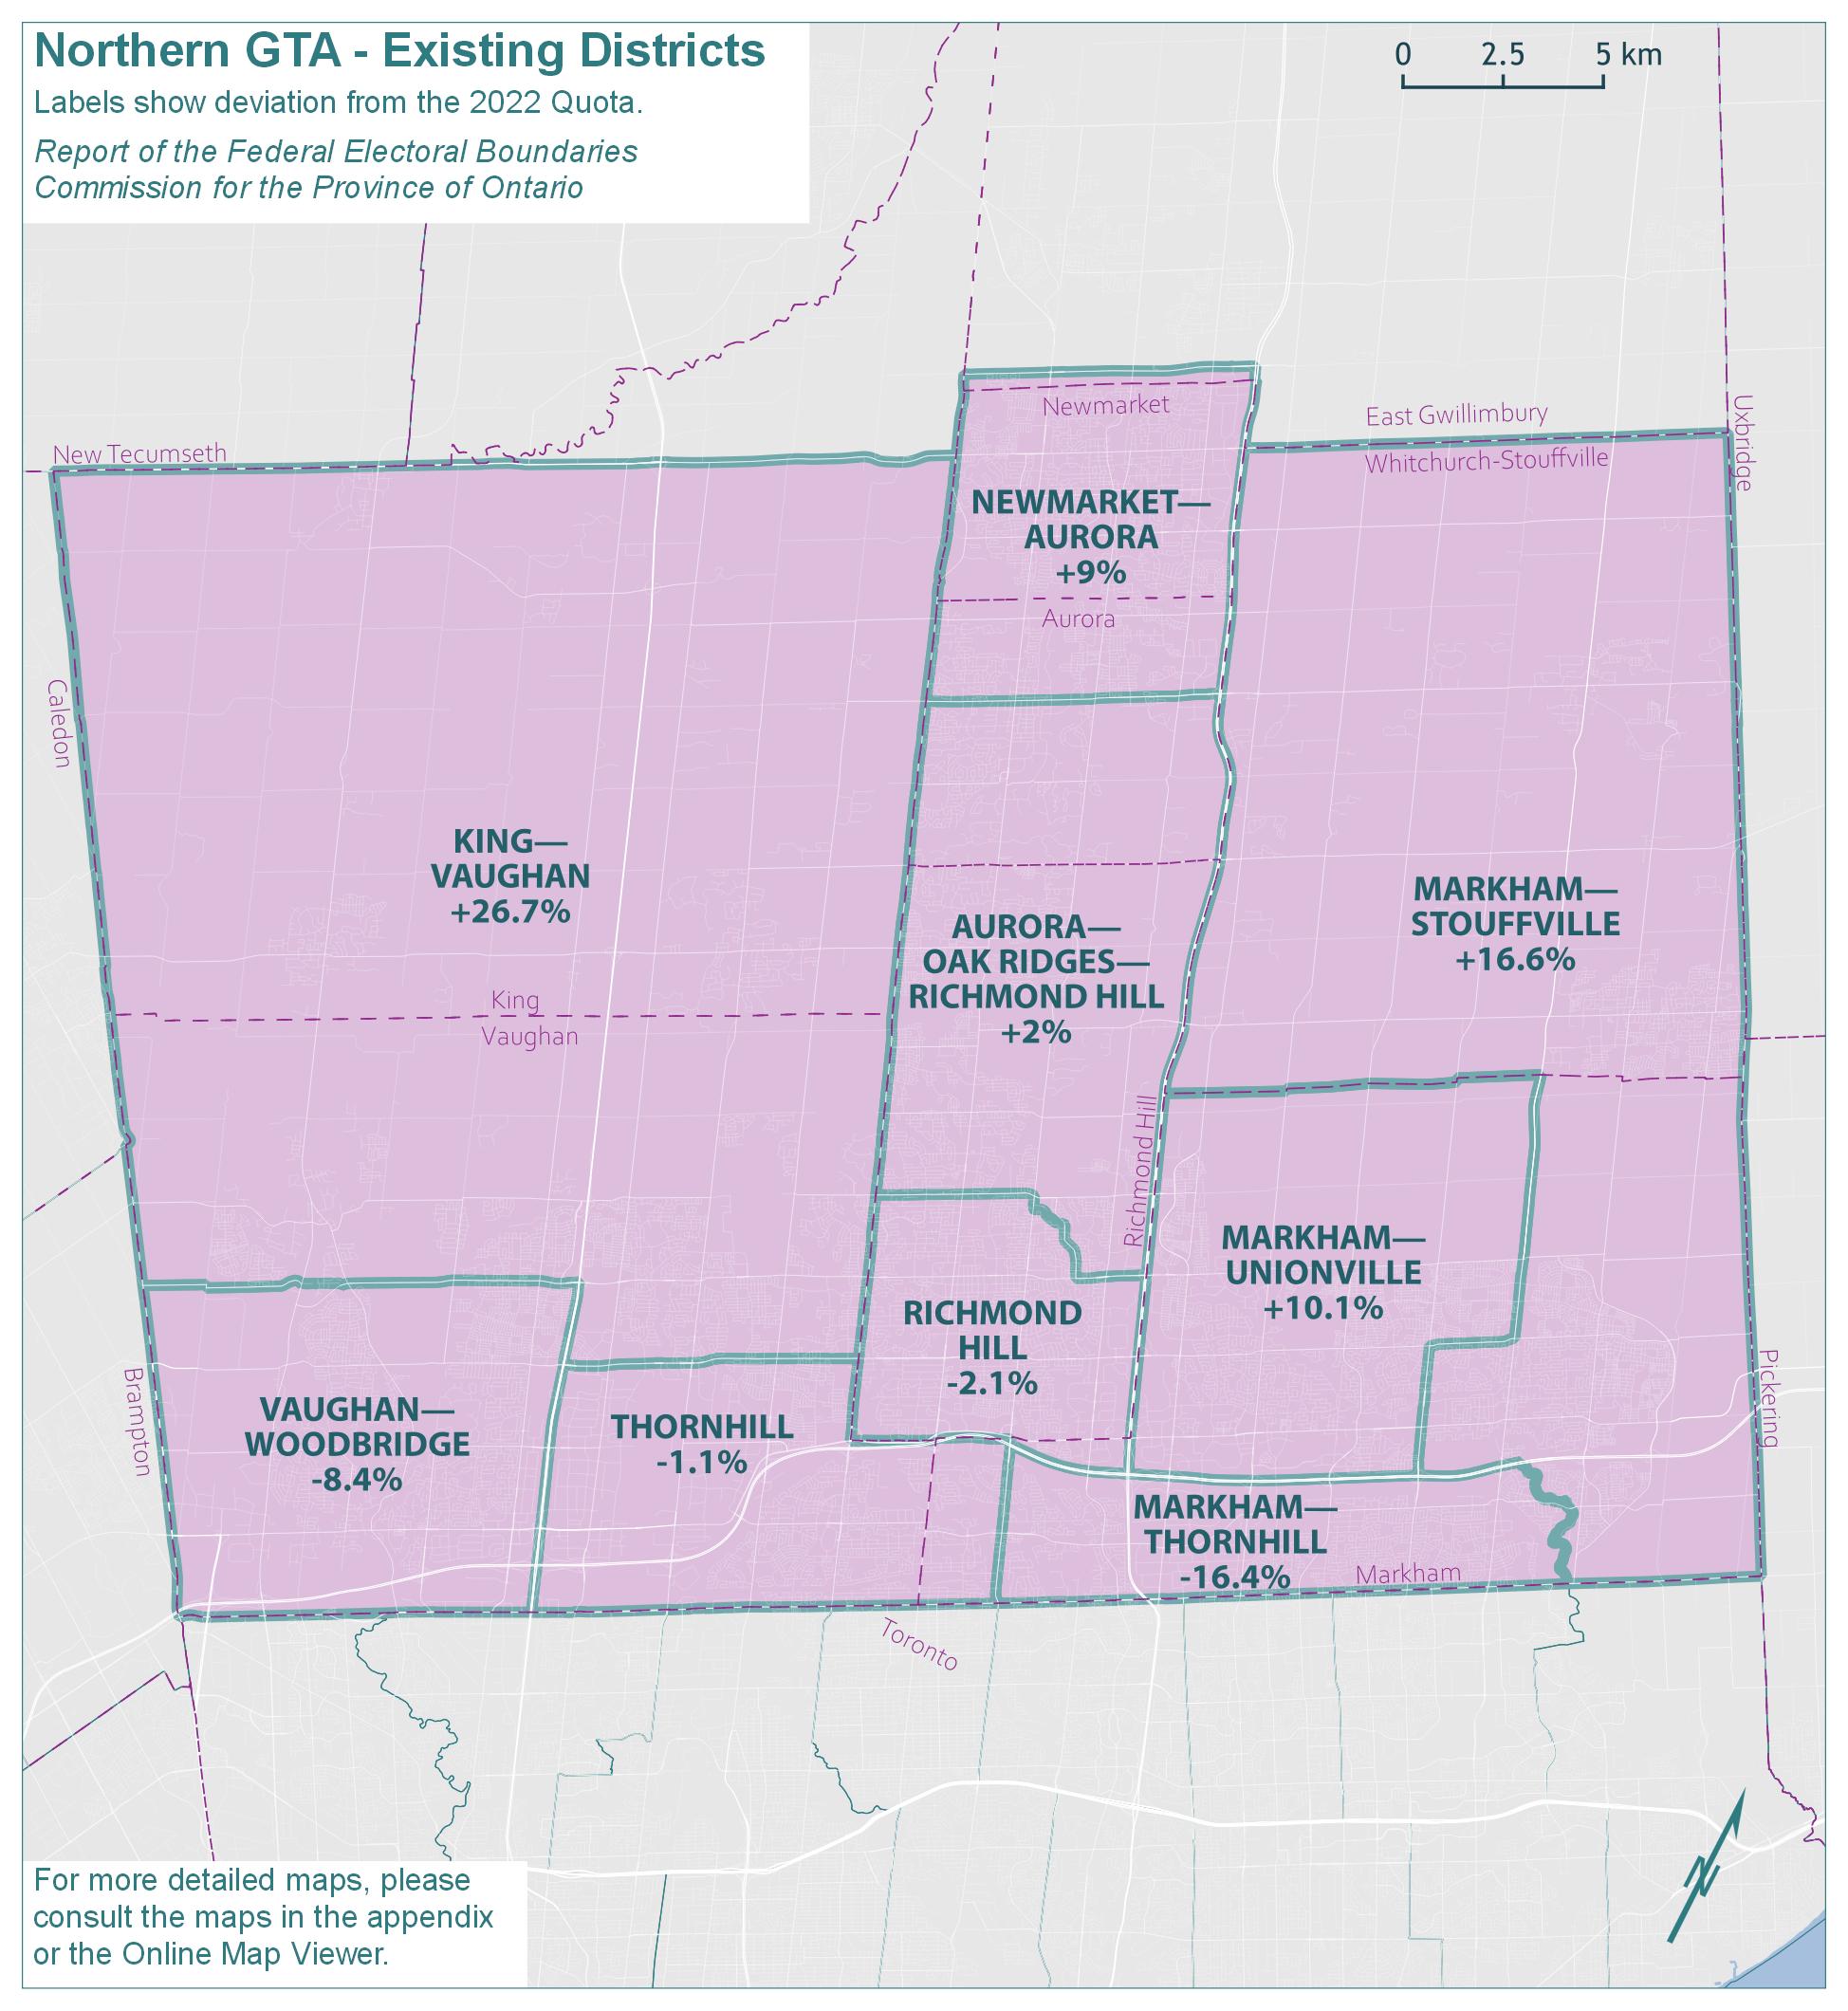 Northern Greater Toronto Area (GTA) - Existing Districts